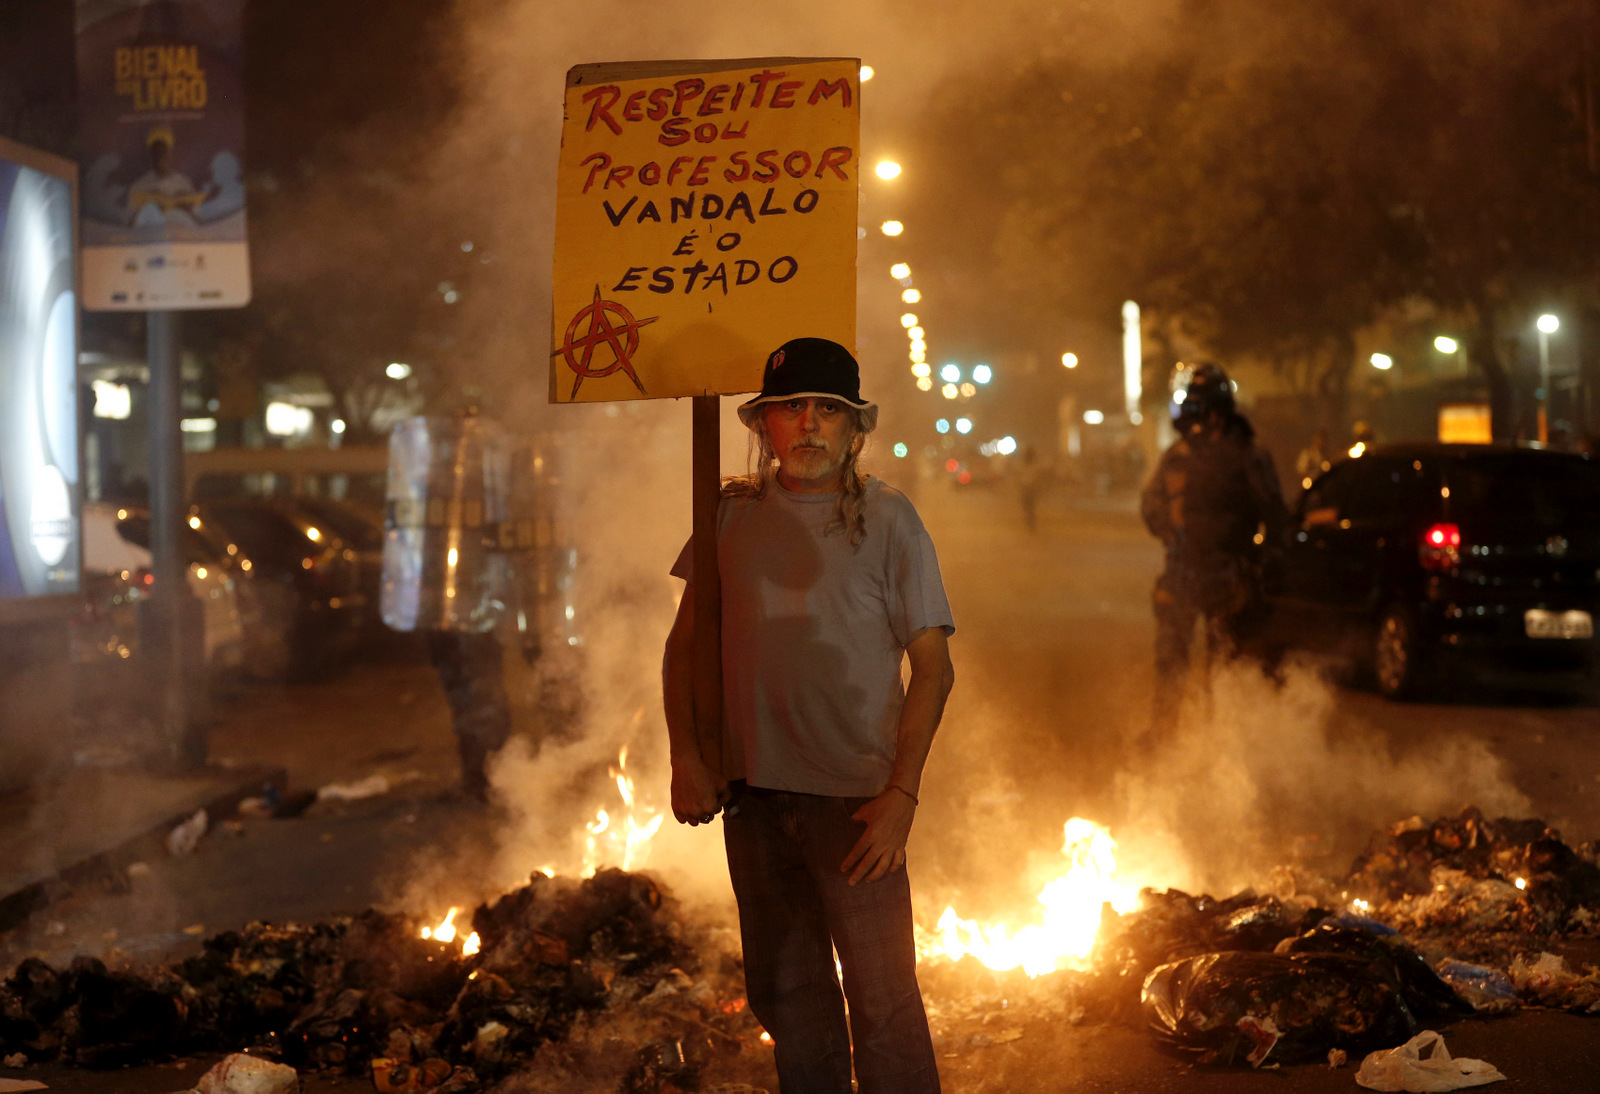 A man holds a sign that reads in Portuguese "Respect, I'm a teacher, the vandal is the state" at a burning barricade set up by protesters in Rio de Janeiro, Brazil. (AP/Silvia Izquierdo)